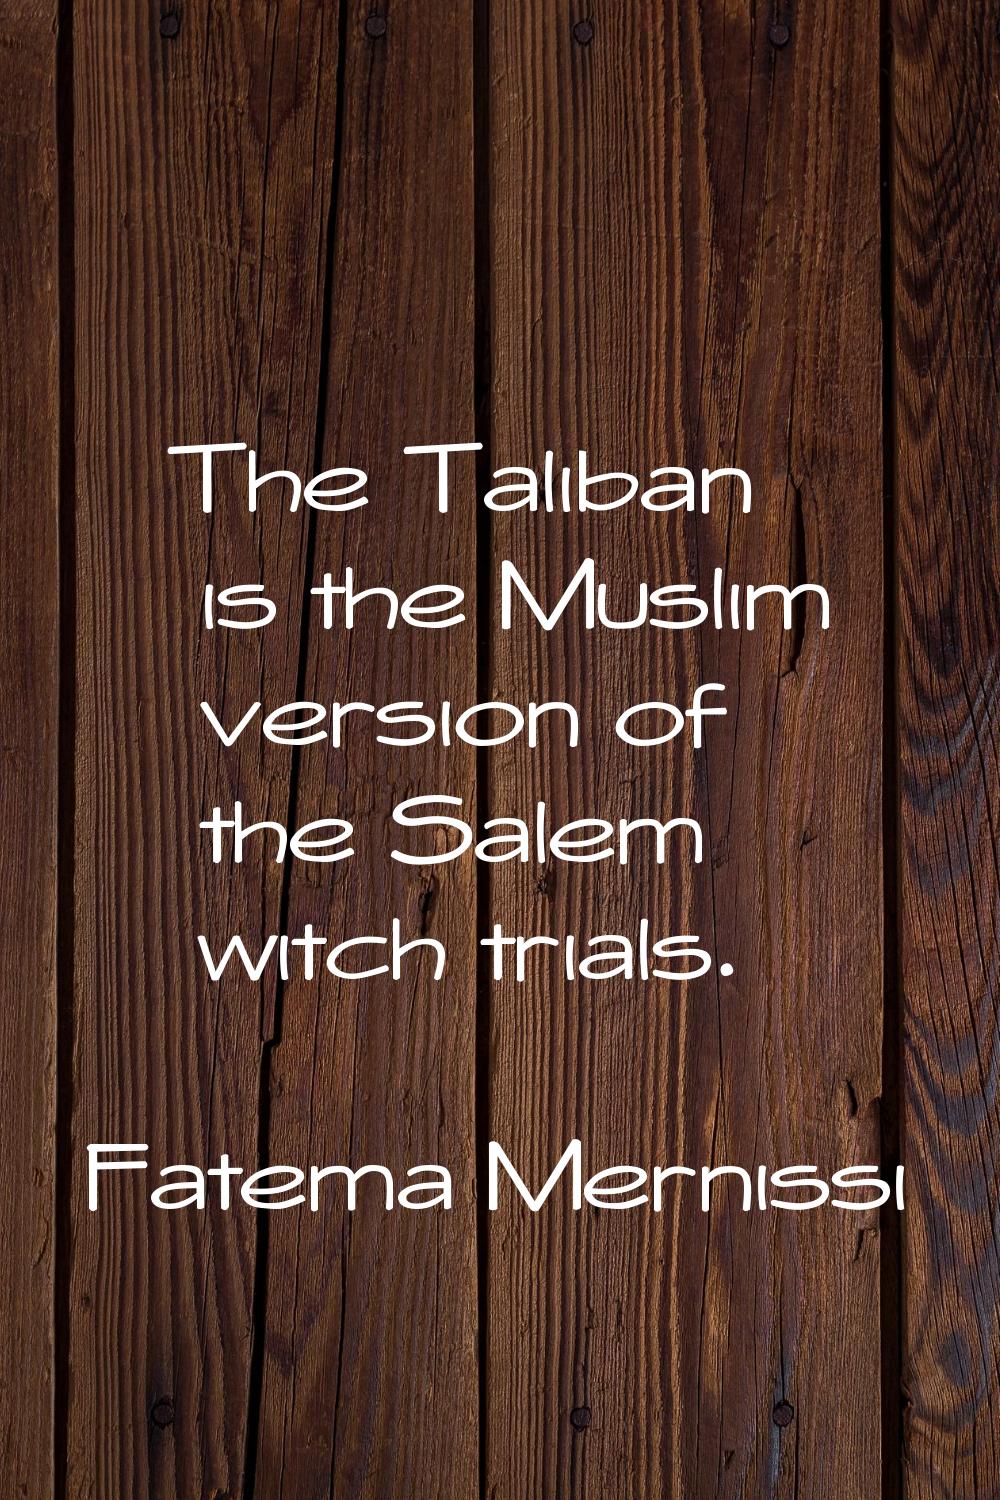 The Taliban is the Muslim version of the Salem witch trials.